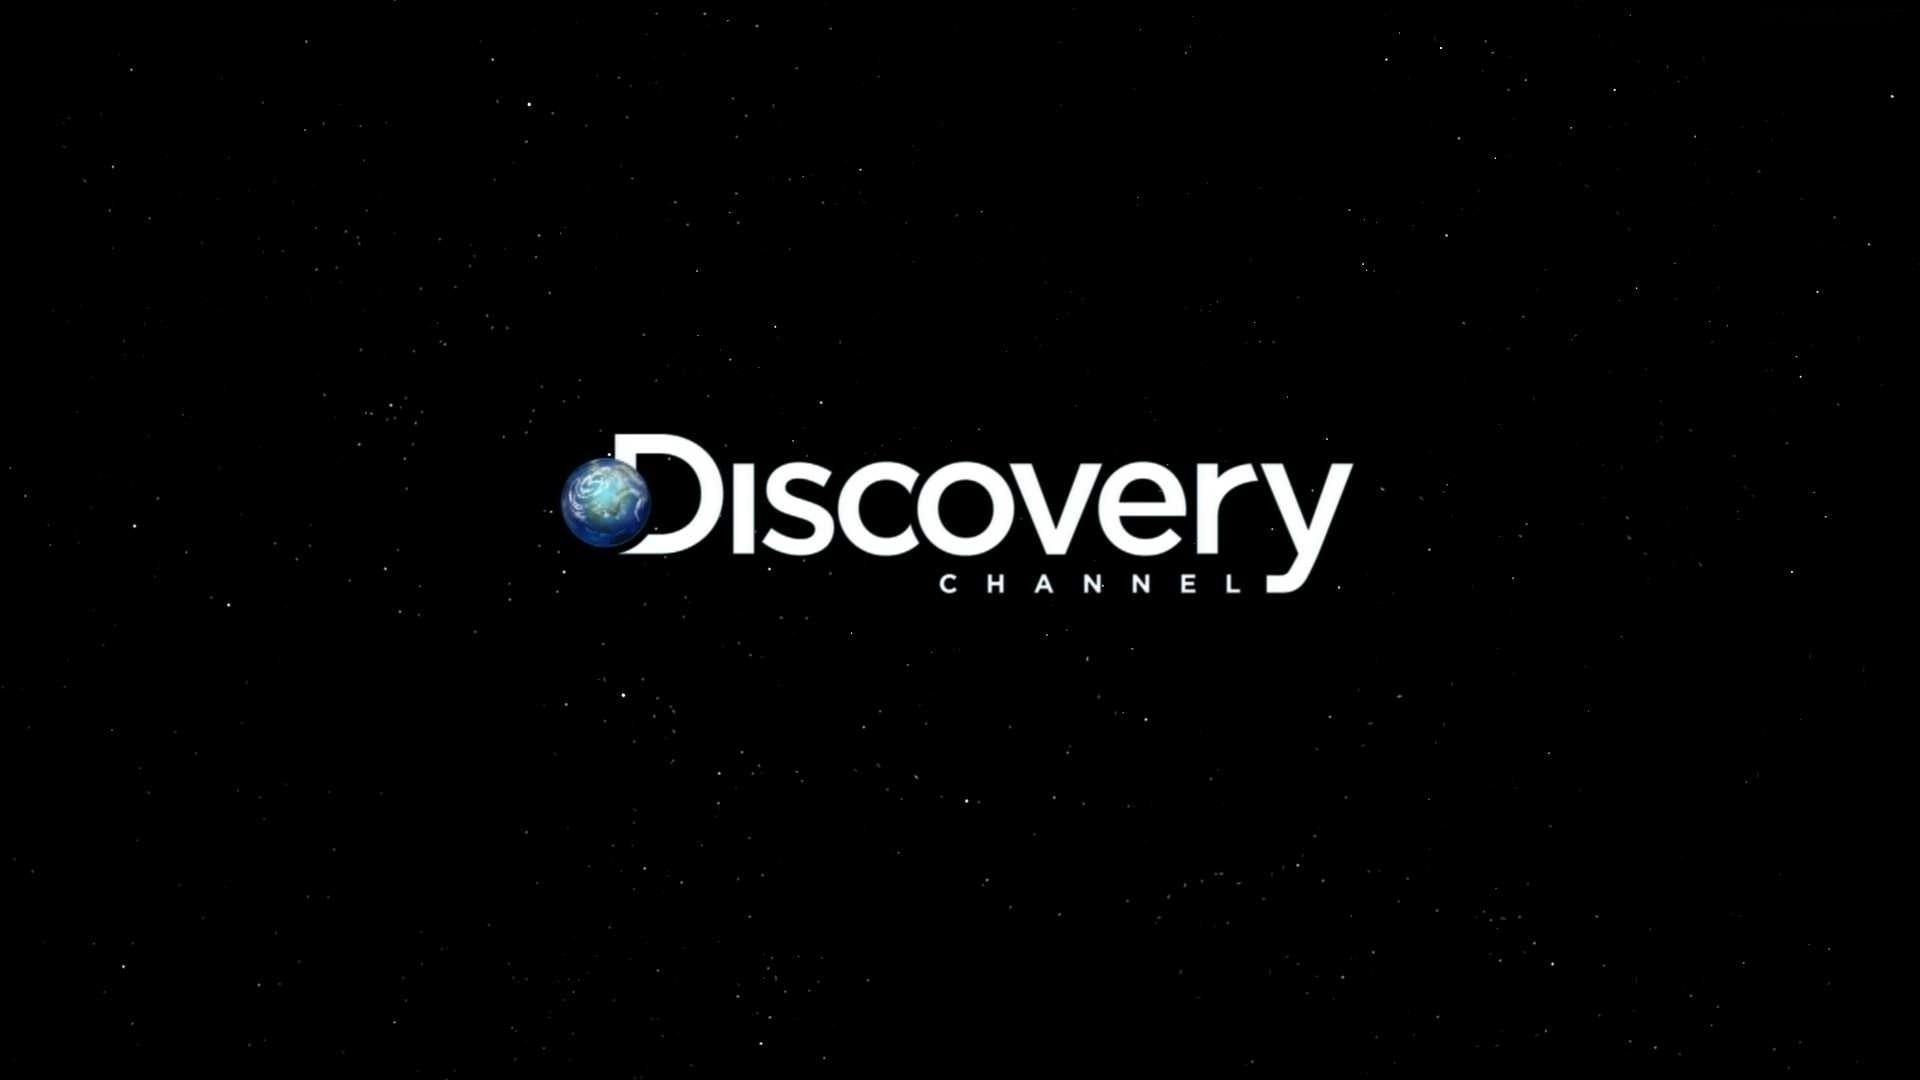 Discovery logo-Brand advertising HD wallpaper, Discovery Channel logo